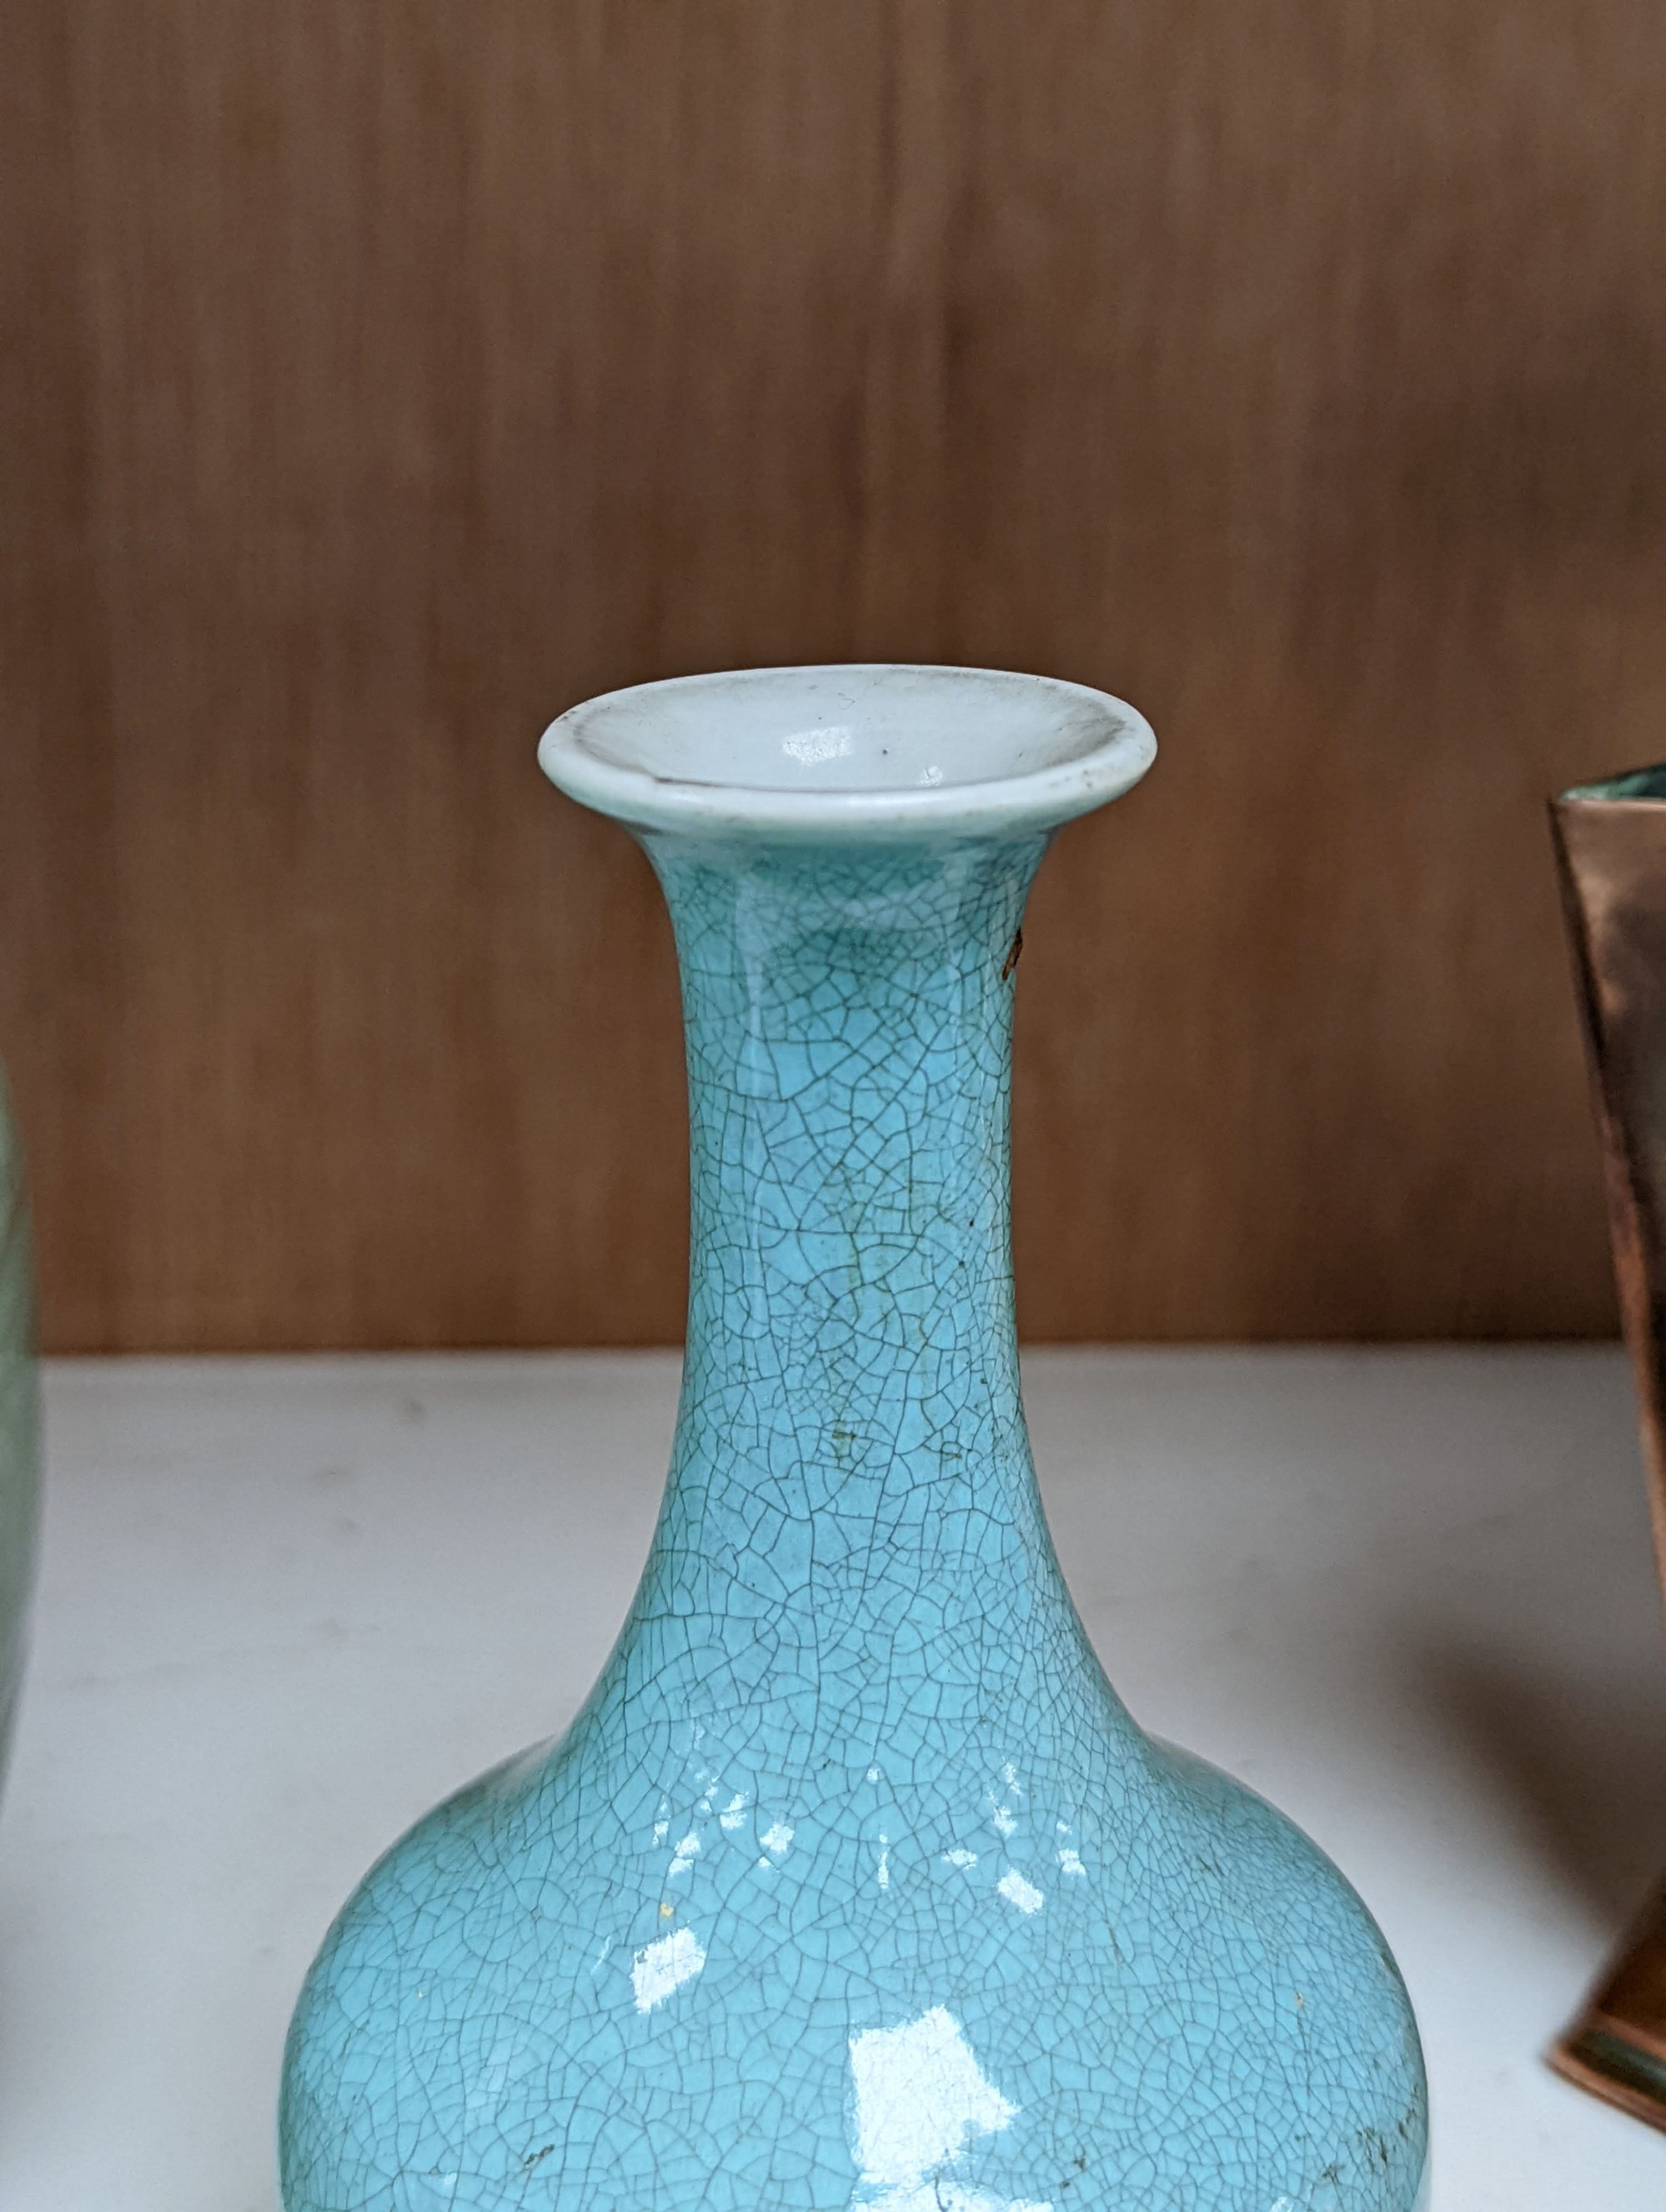 Three 19th Chinese monochrome glazed vases, with sang de boeuf, celadon and turquoise crackle glaze, tallest 21 cm